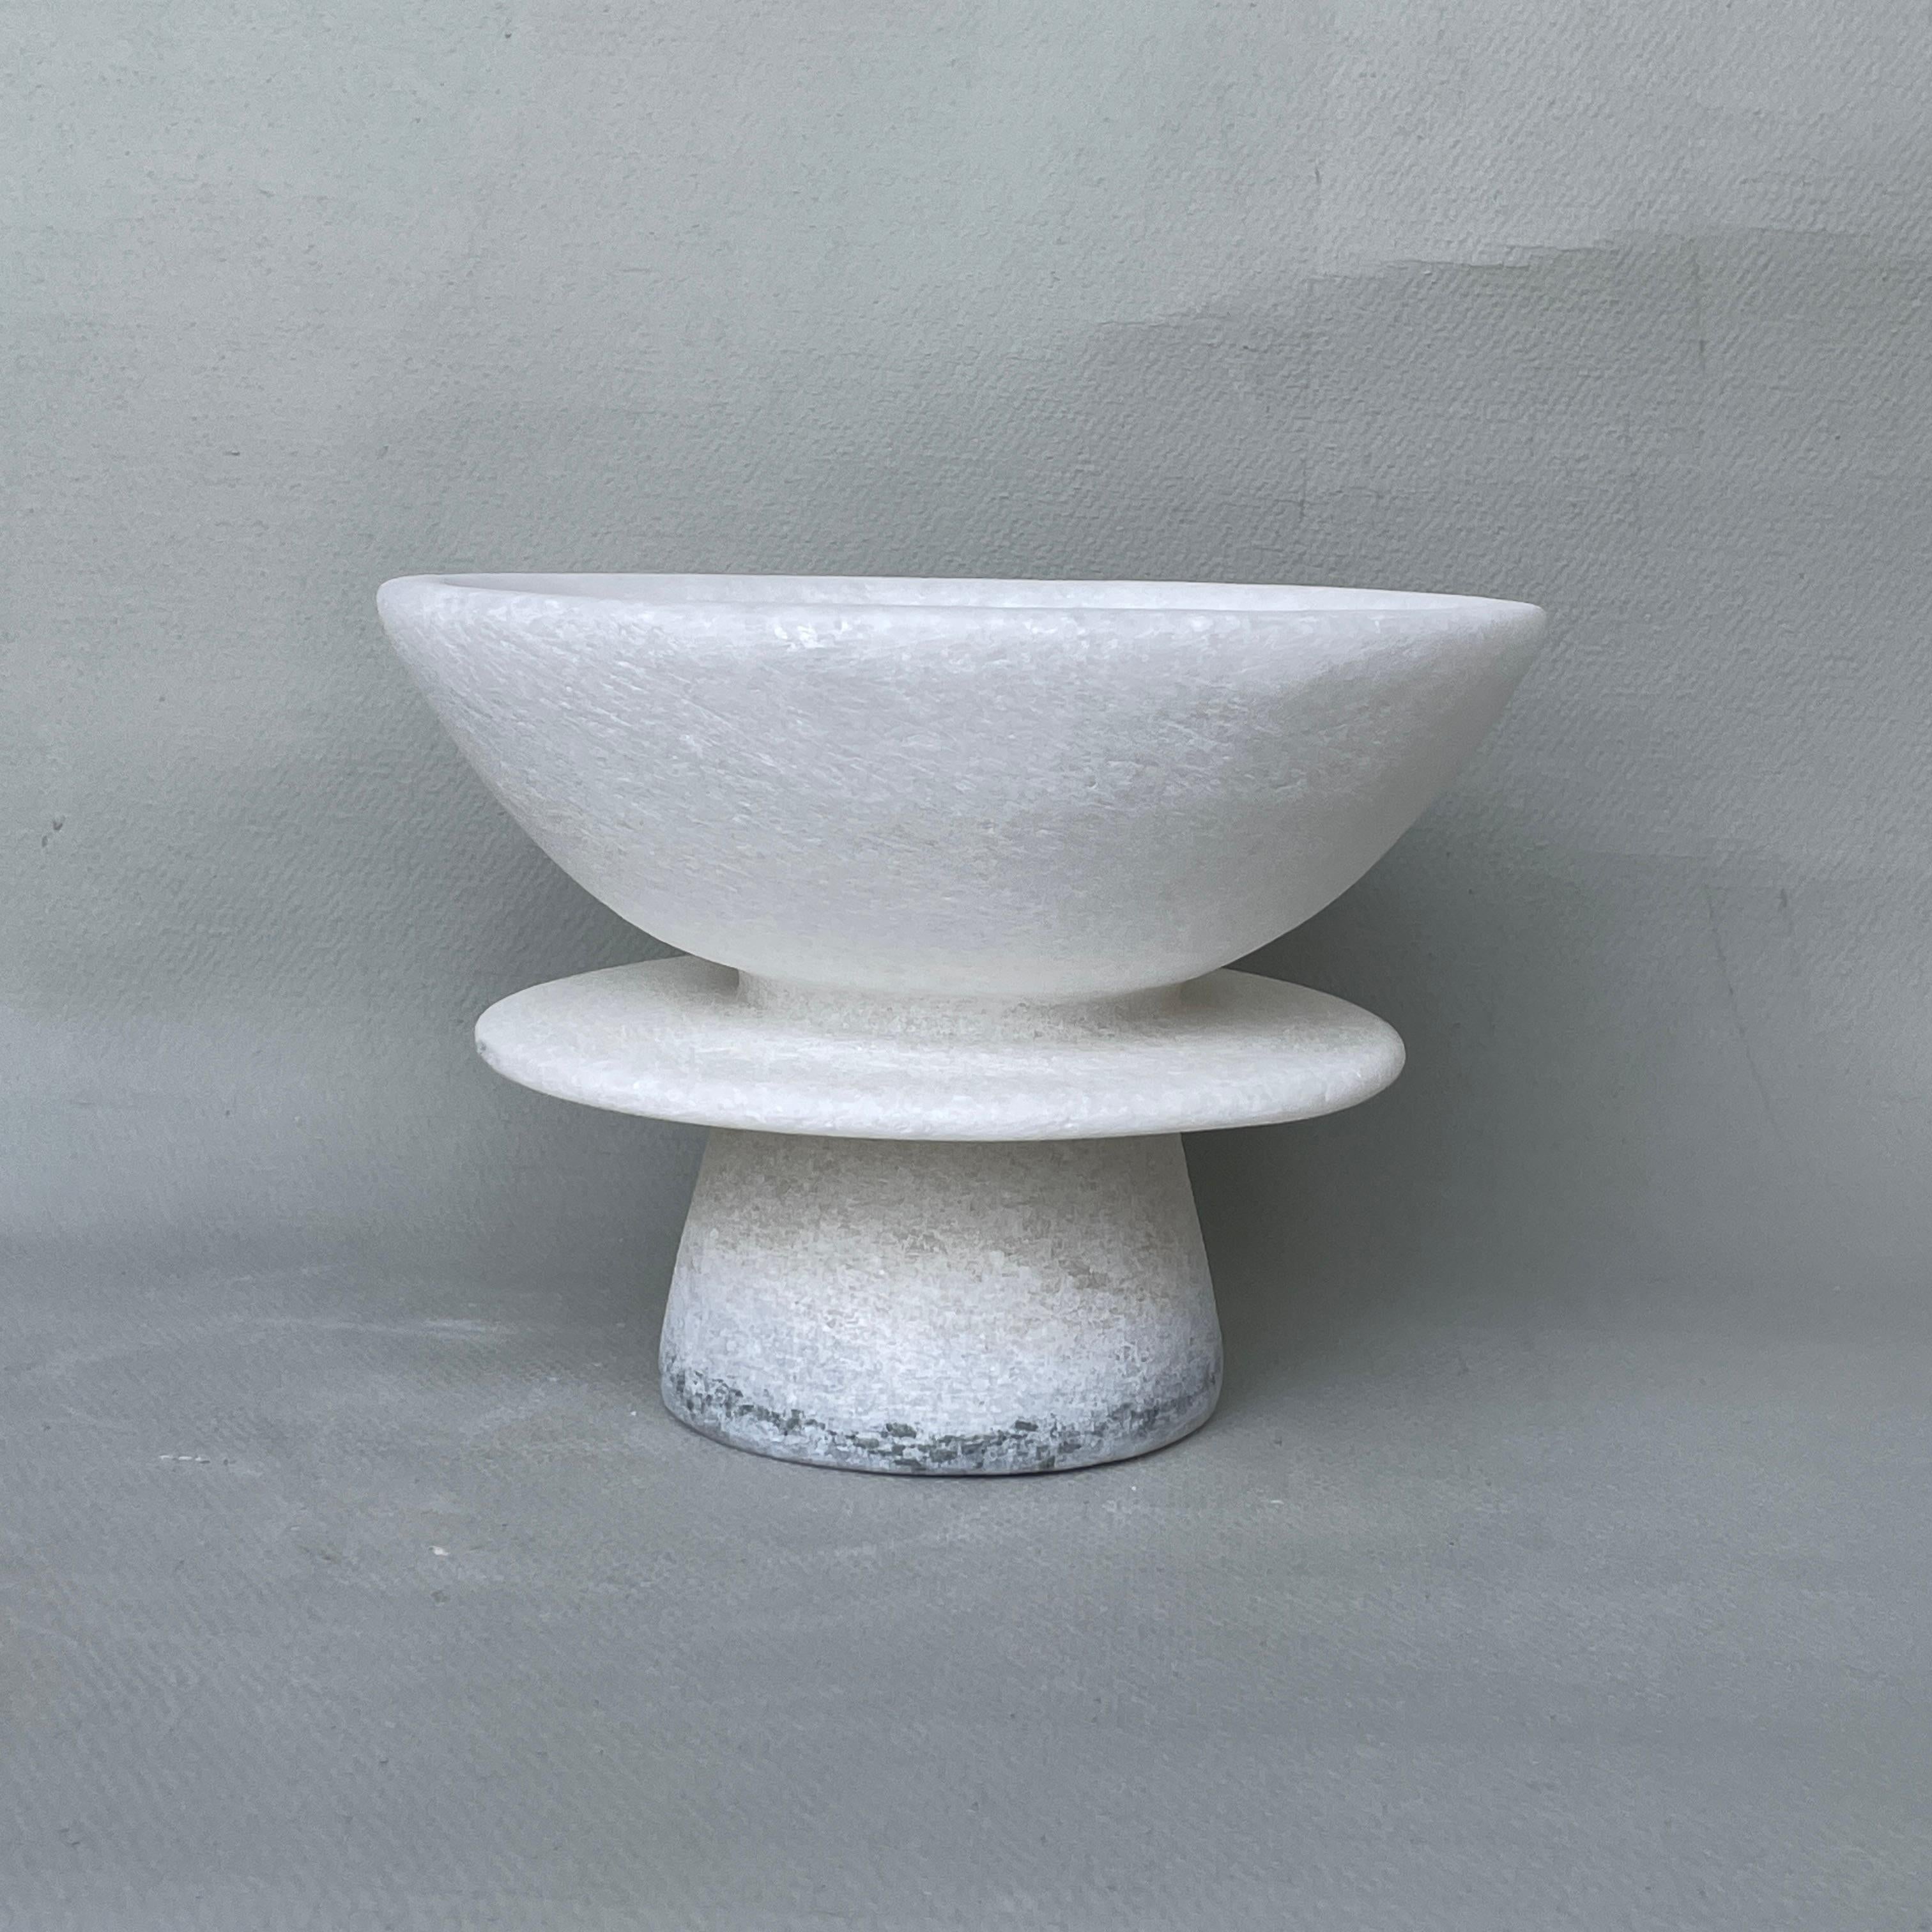 Unique Naxian Marble Vessel by Tom Von Kaenel
Unique piece.
Dimensions: Ø 18 x H 13 cm.
Materials: Naxian marble.

The surfaces of the objects are not sealed, they are not protected against acid. The lines of the handcraft are visible it gives